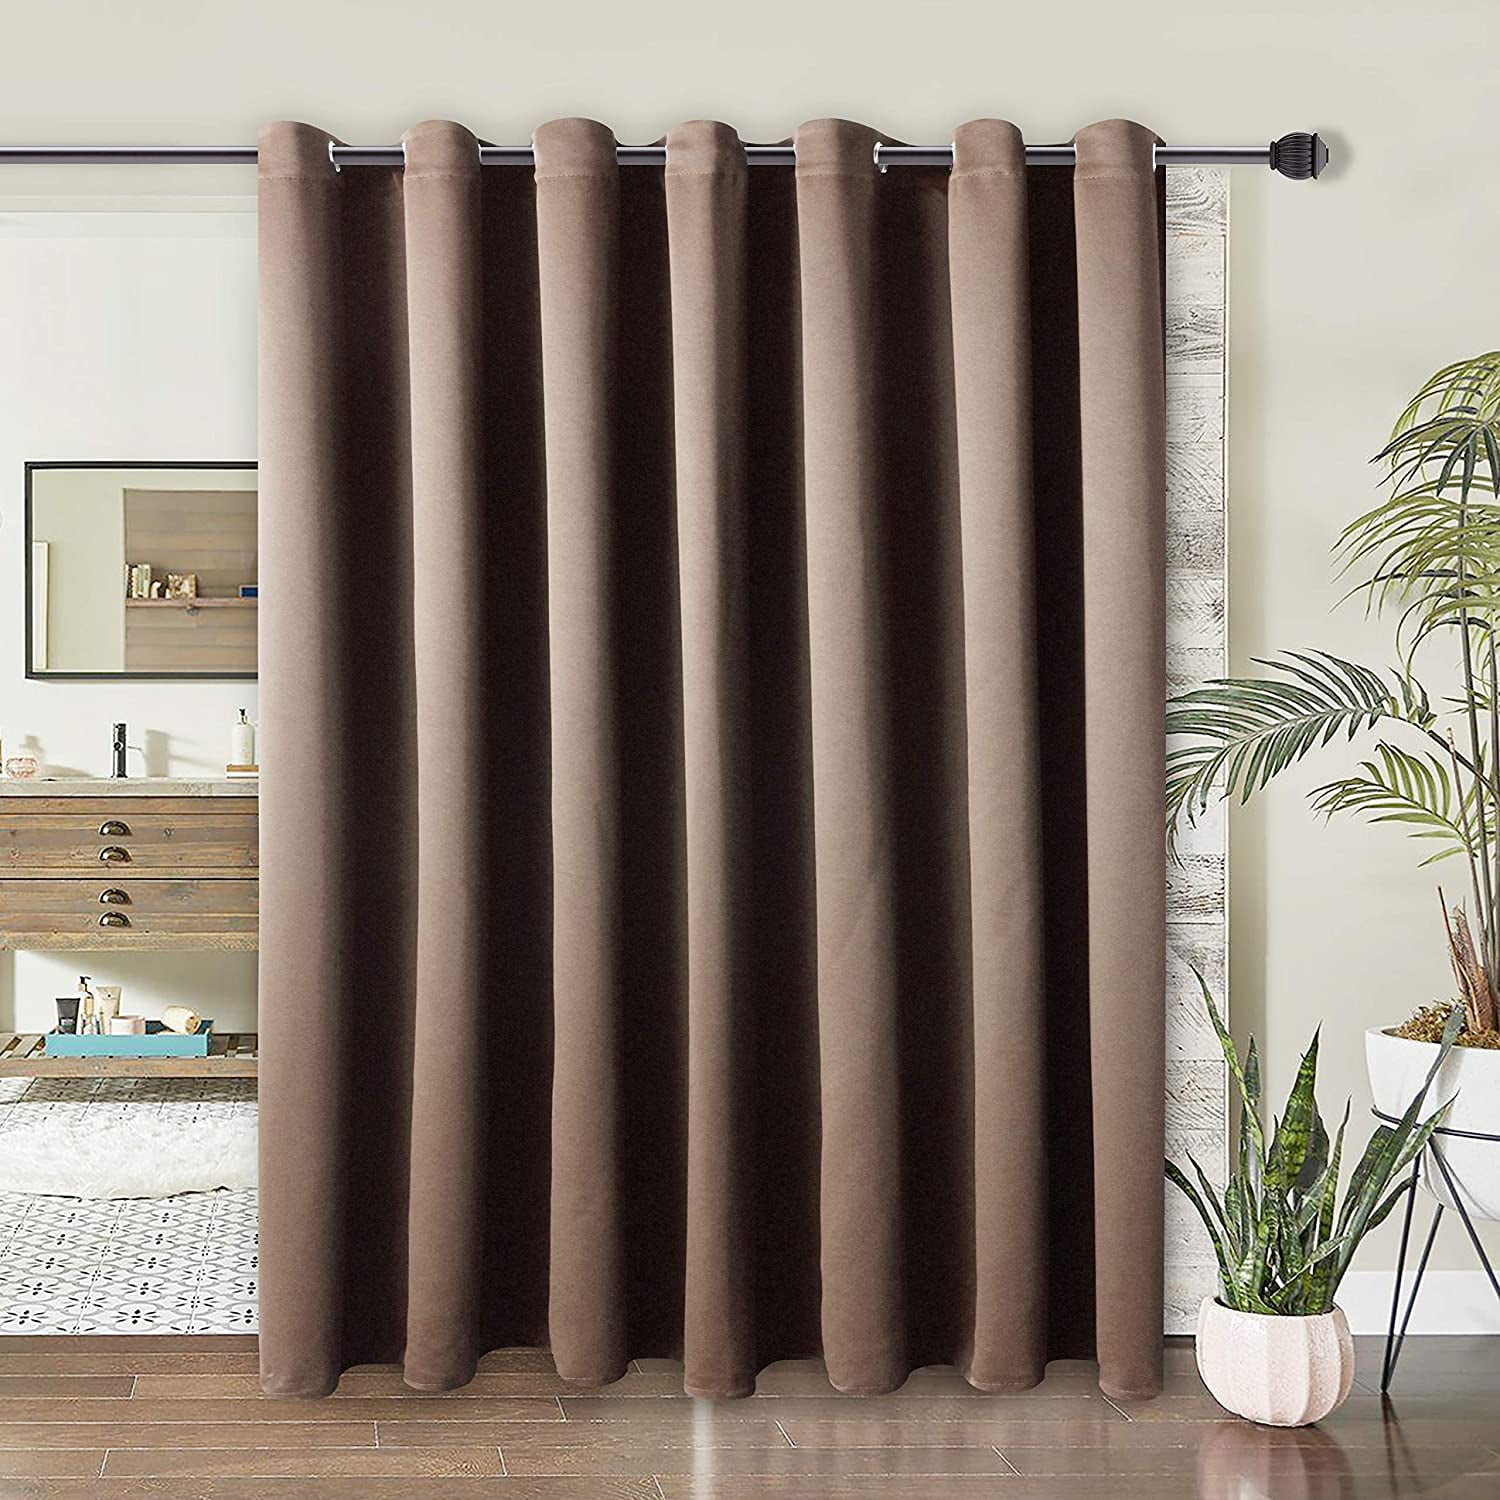 Details about   Blackout Room Divider Panel Privacy Partition Heavyweight Premium Fabric 